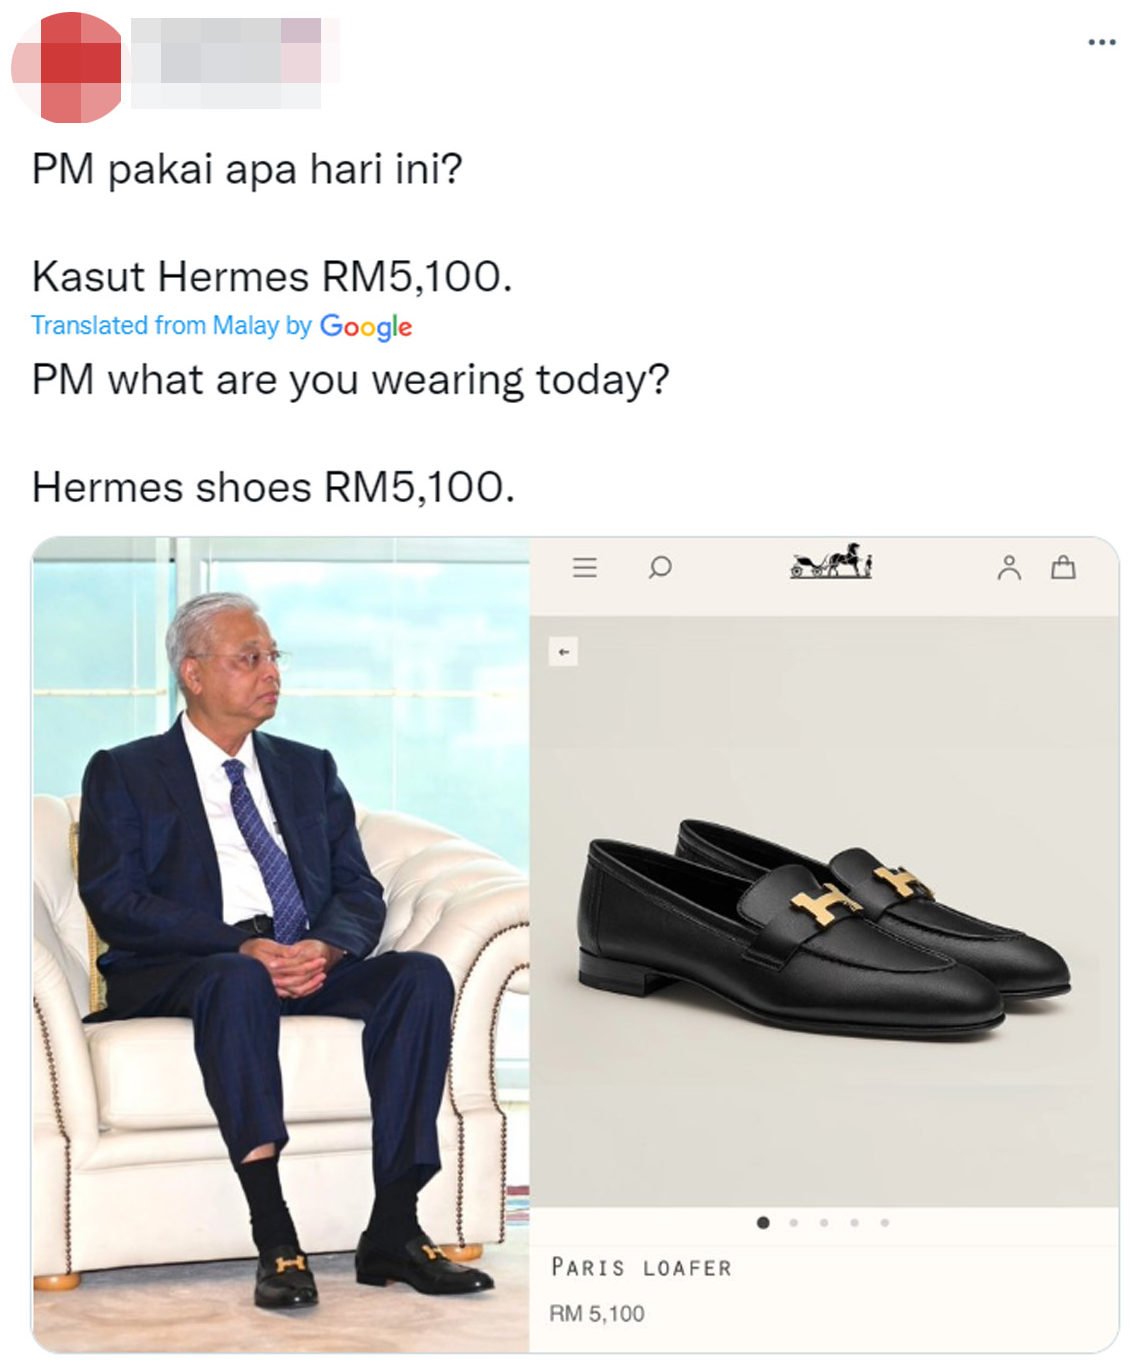 Angreb I fare Ryd op M'sian PM Wears S$1.5K Hermès Shoes To Meet Lawrence Wong, Sparks Debate  Over Fashion Choice